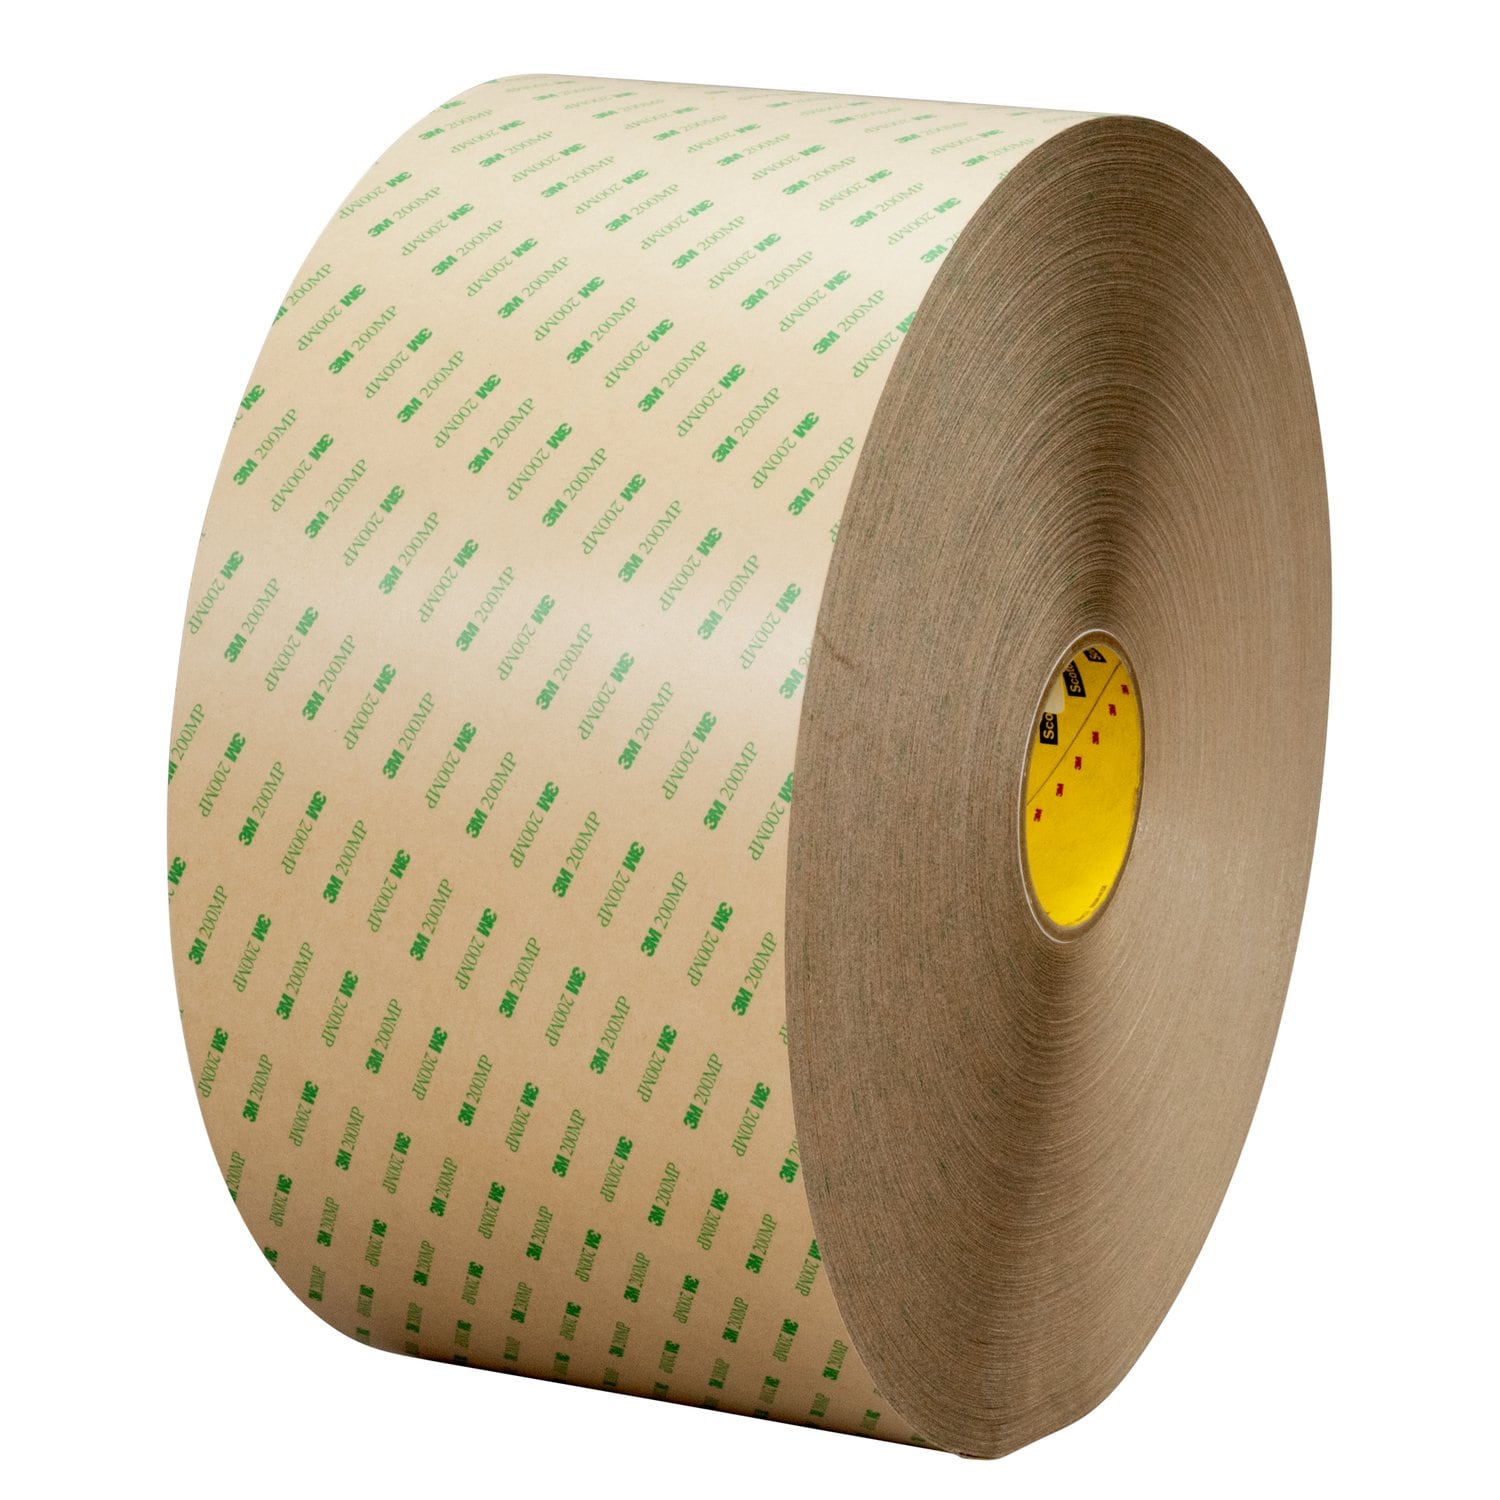 7010334214 - 3M Adhesive Transfer Tape 9668MP, Clear, 18 in x 180 yd, 5 Mil, 1/Case